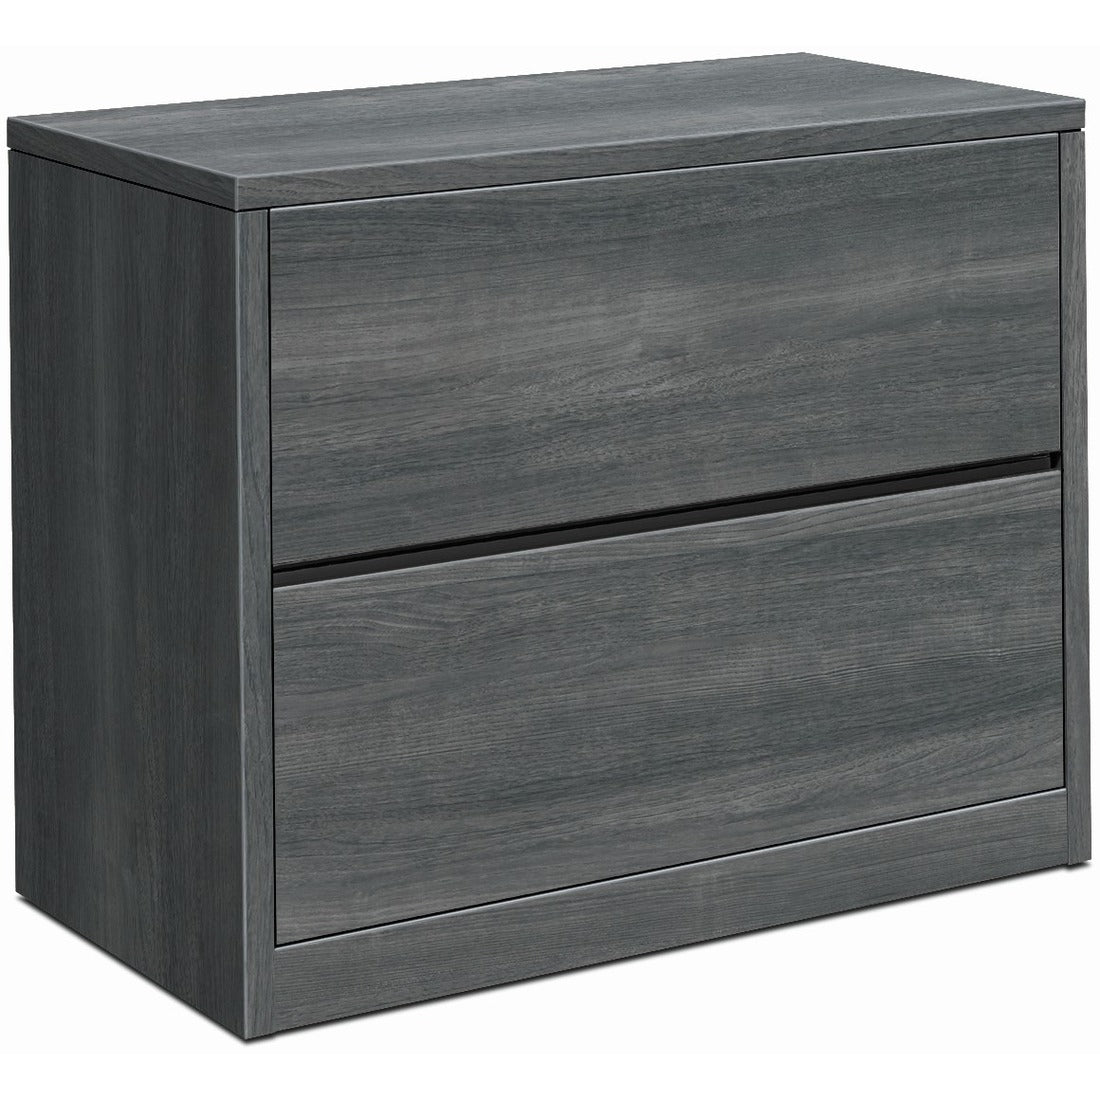 hon-10500-h10563-lateral-file-36-x-20295-2-drawers-finish-sterling-ash_hon10563ls1 - 1